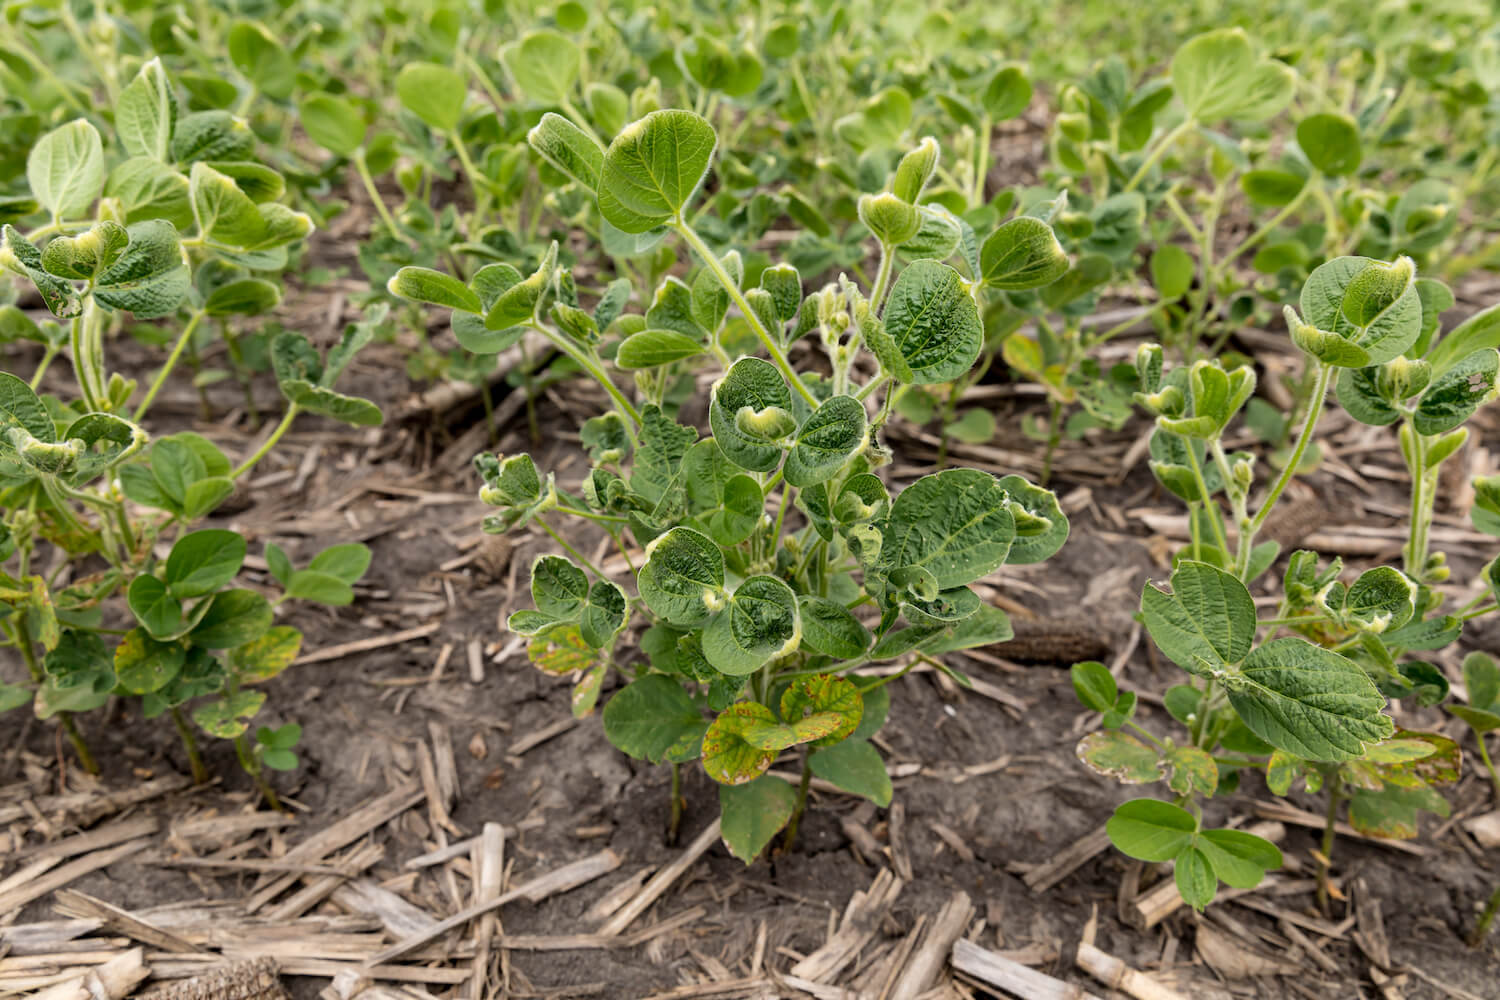 Young soybean plants suffering from dicamba herbicide damage. October 2020